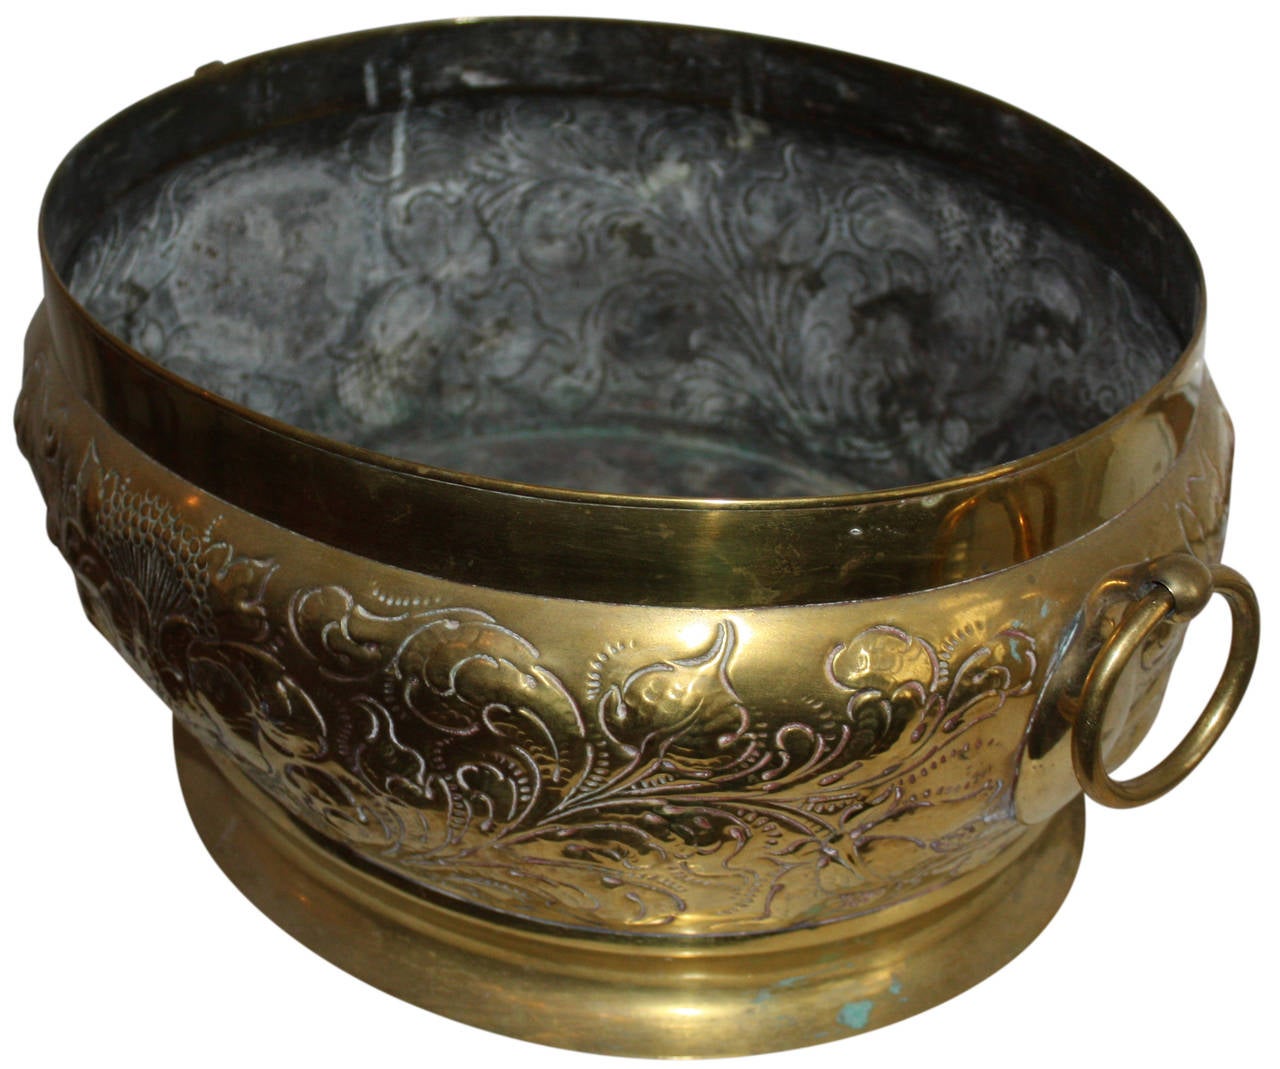 Lovely Rococo brass firewood bucket. Could be used as a planter.